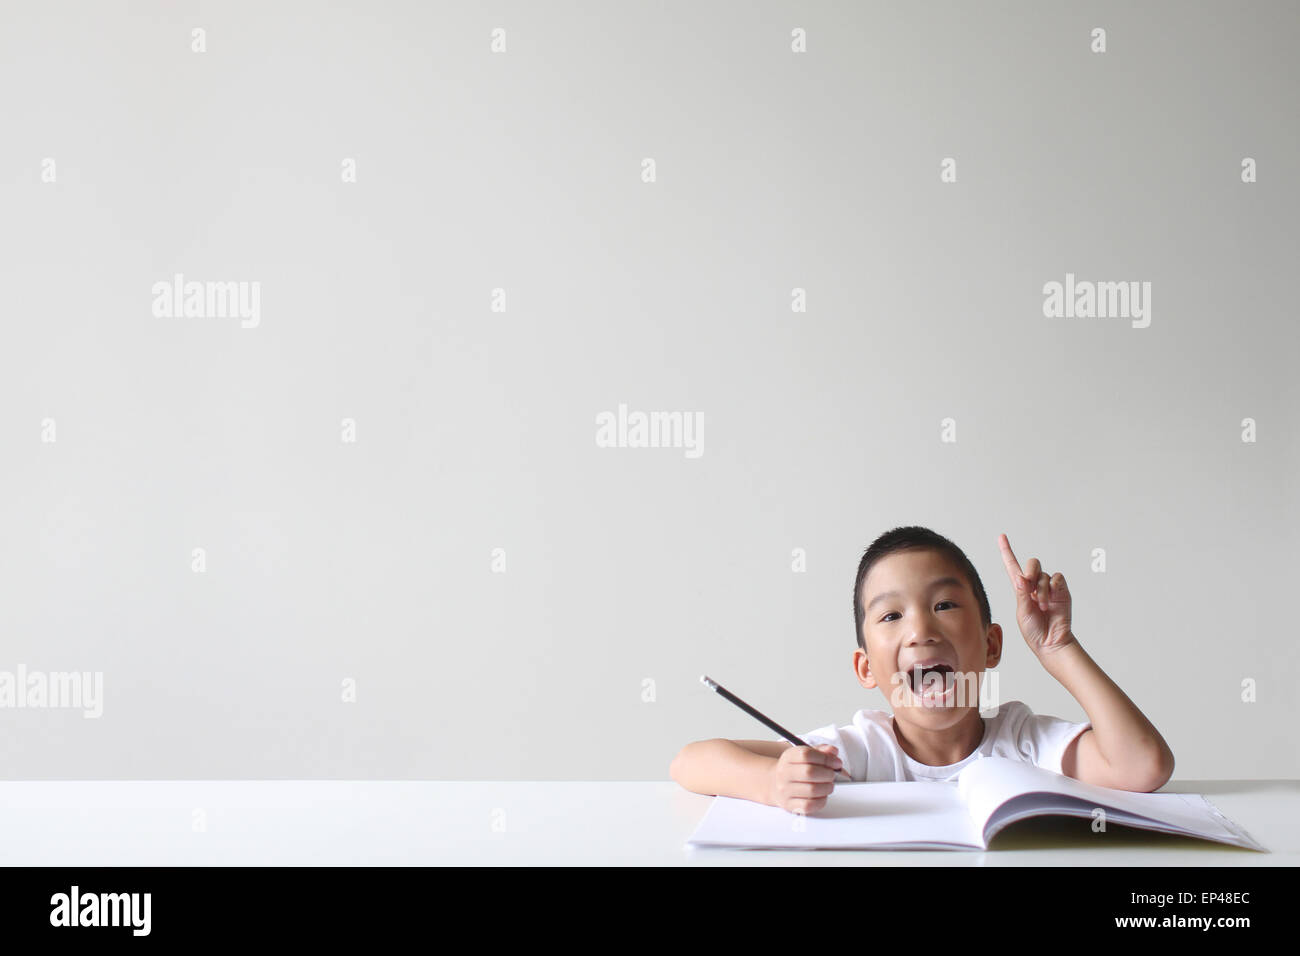 Boy having an idea while studying Stock Photo